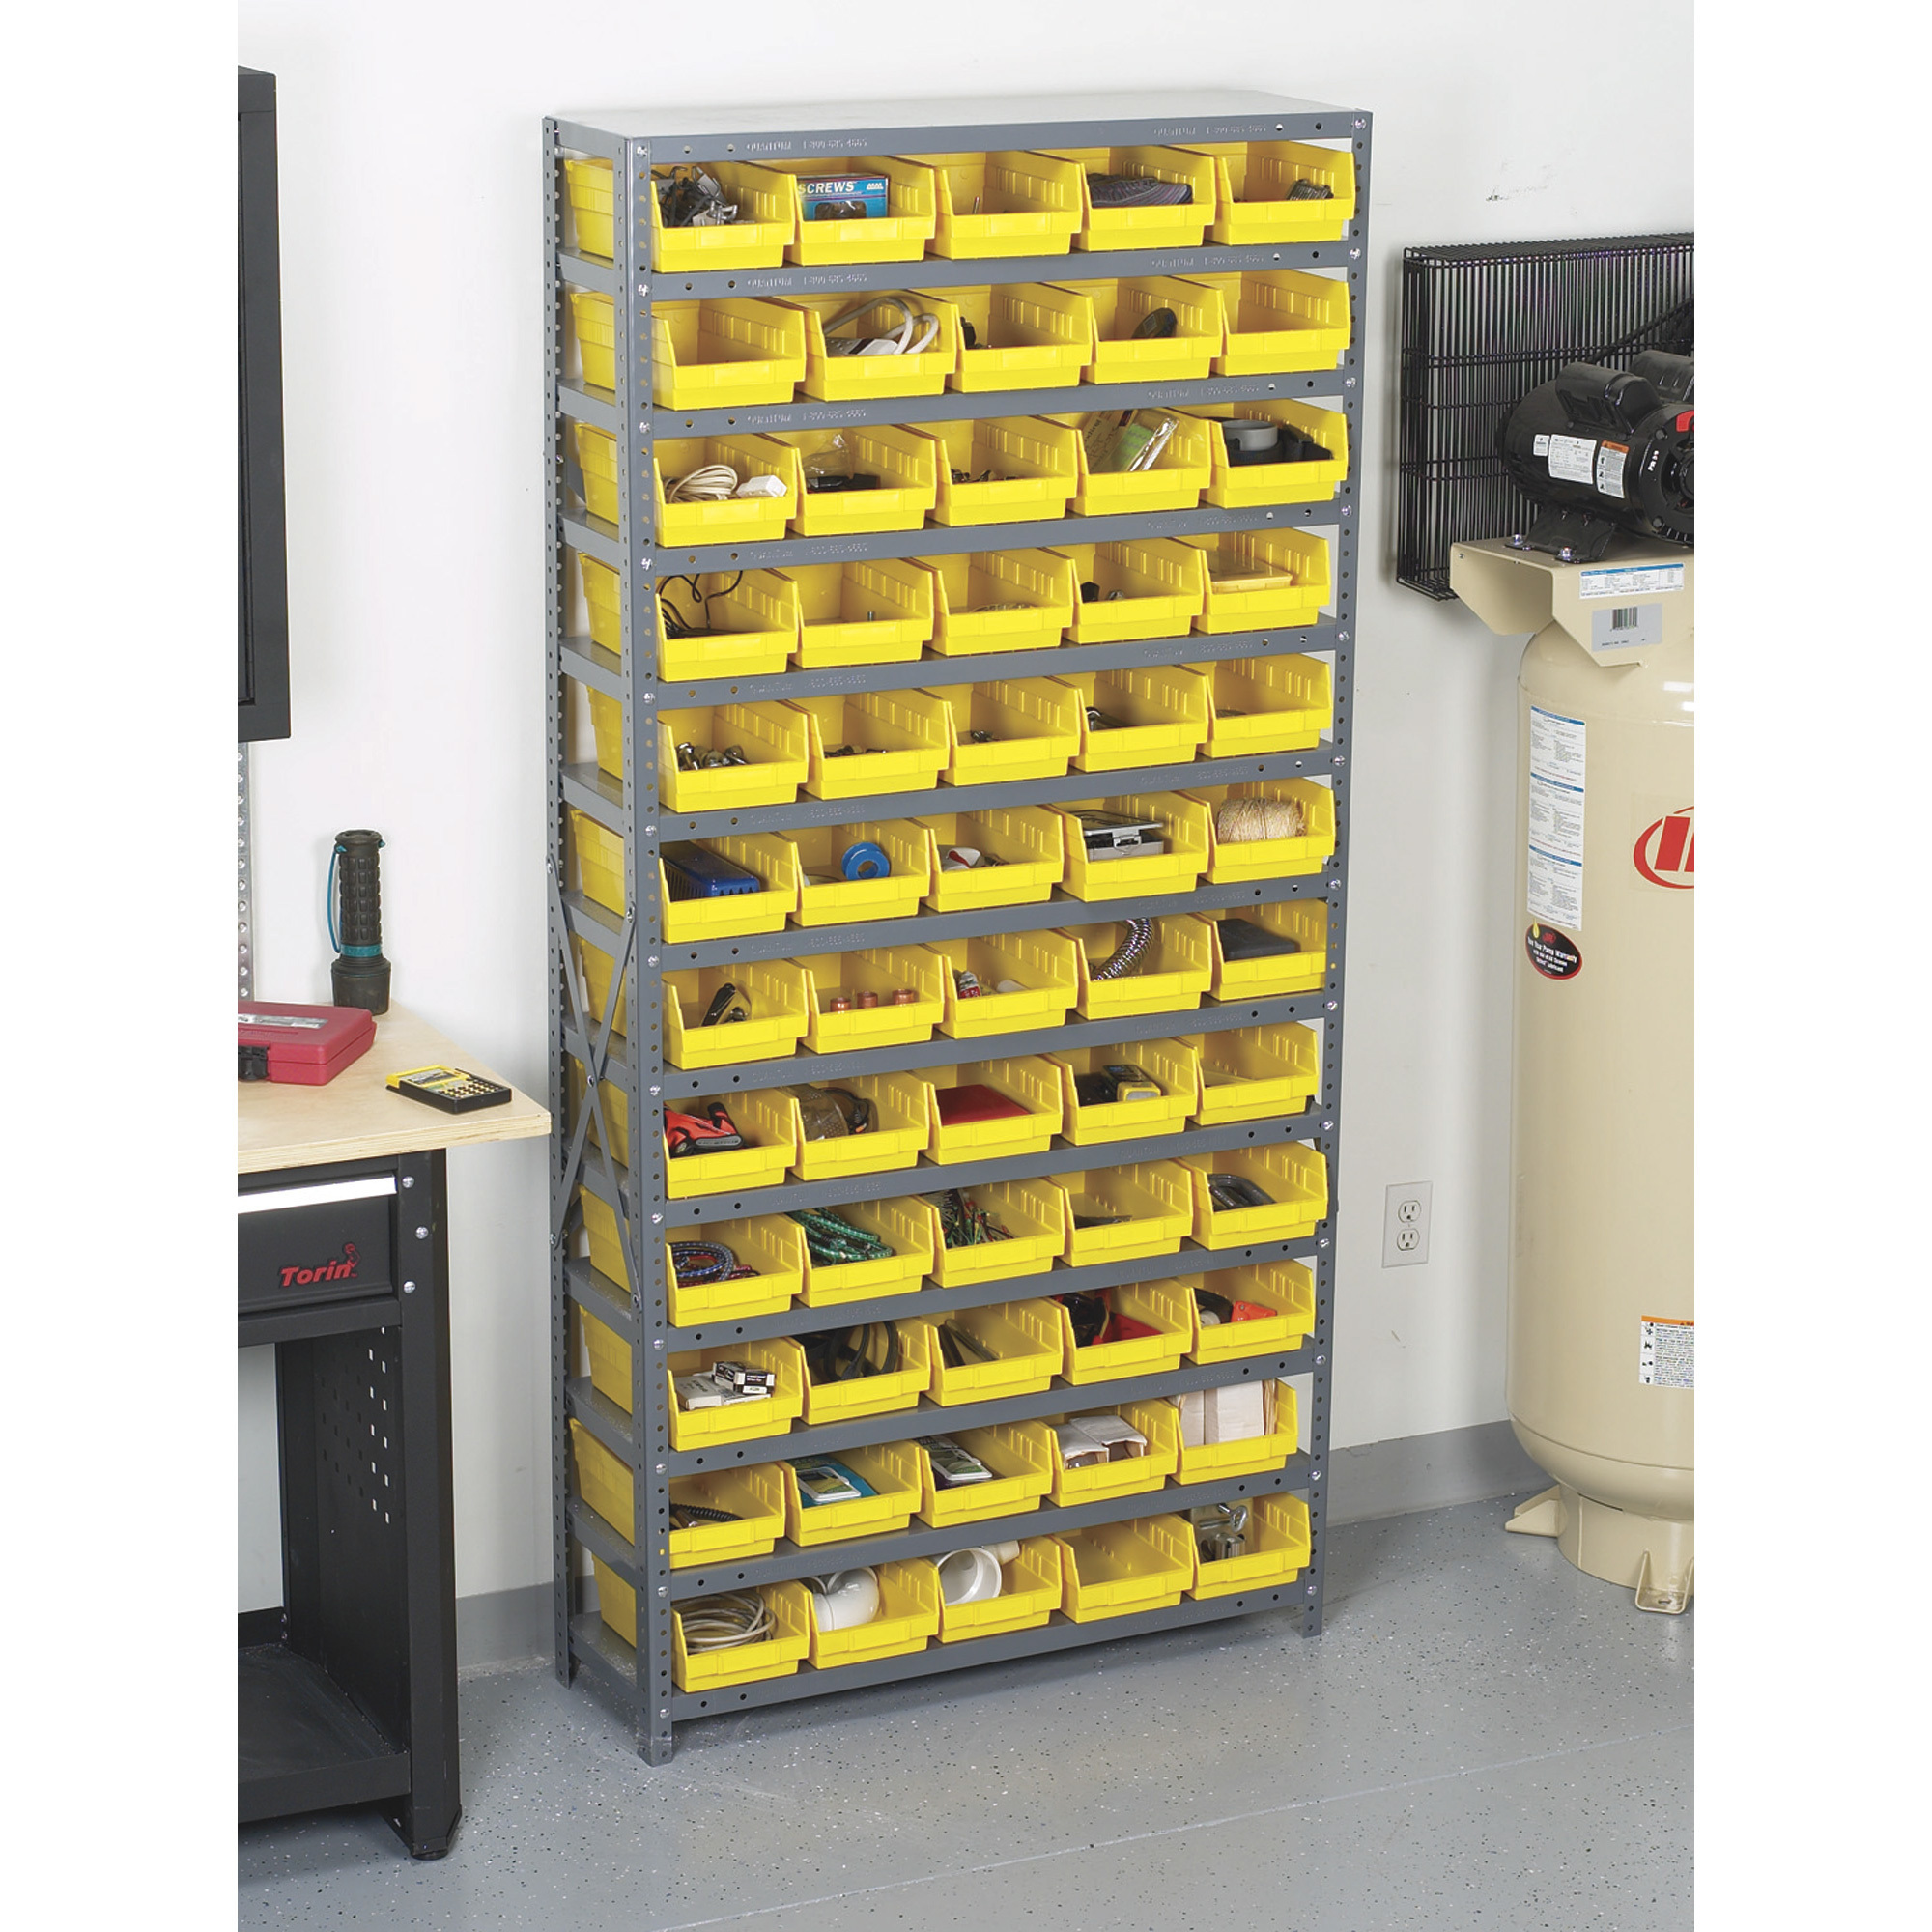 Quantum Storage Single Side Metal Shelving Unit With 60 Bins, 12in. x 36in.  x 75in. Rack Size, Yellow, Model# 1275-102YL